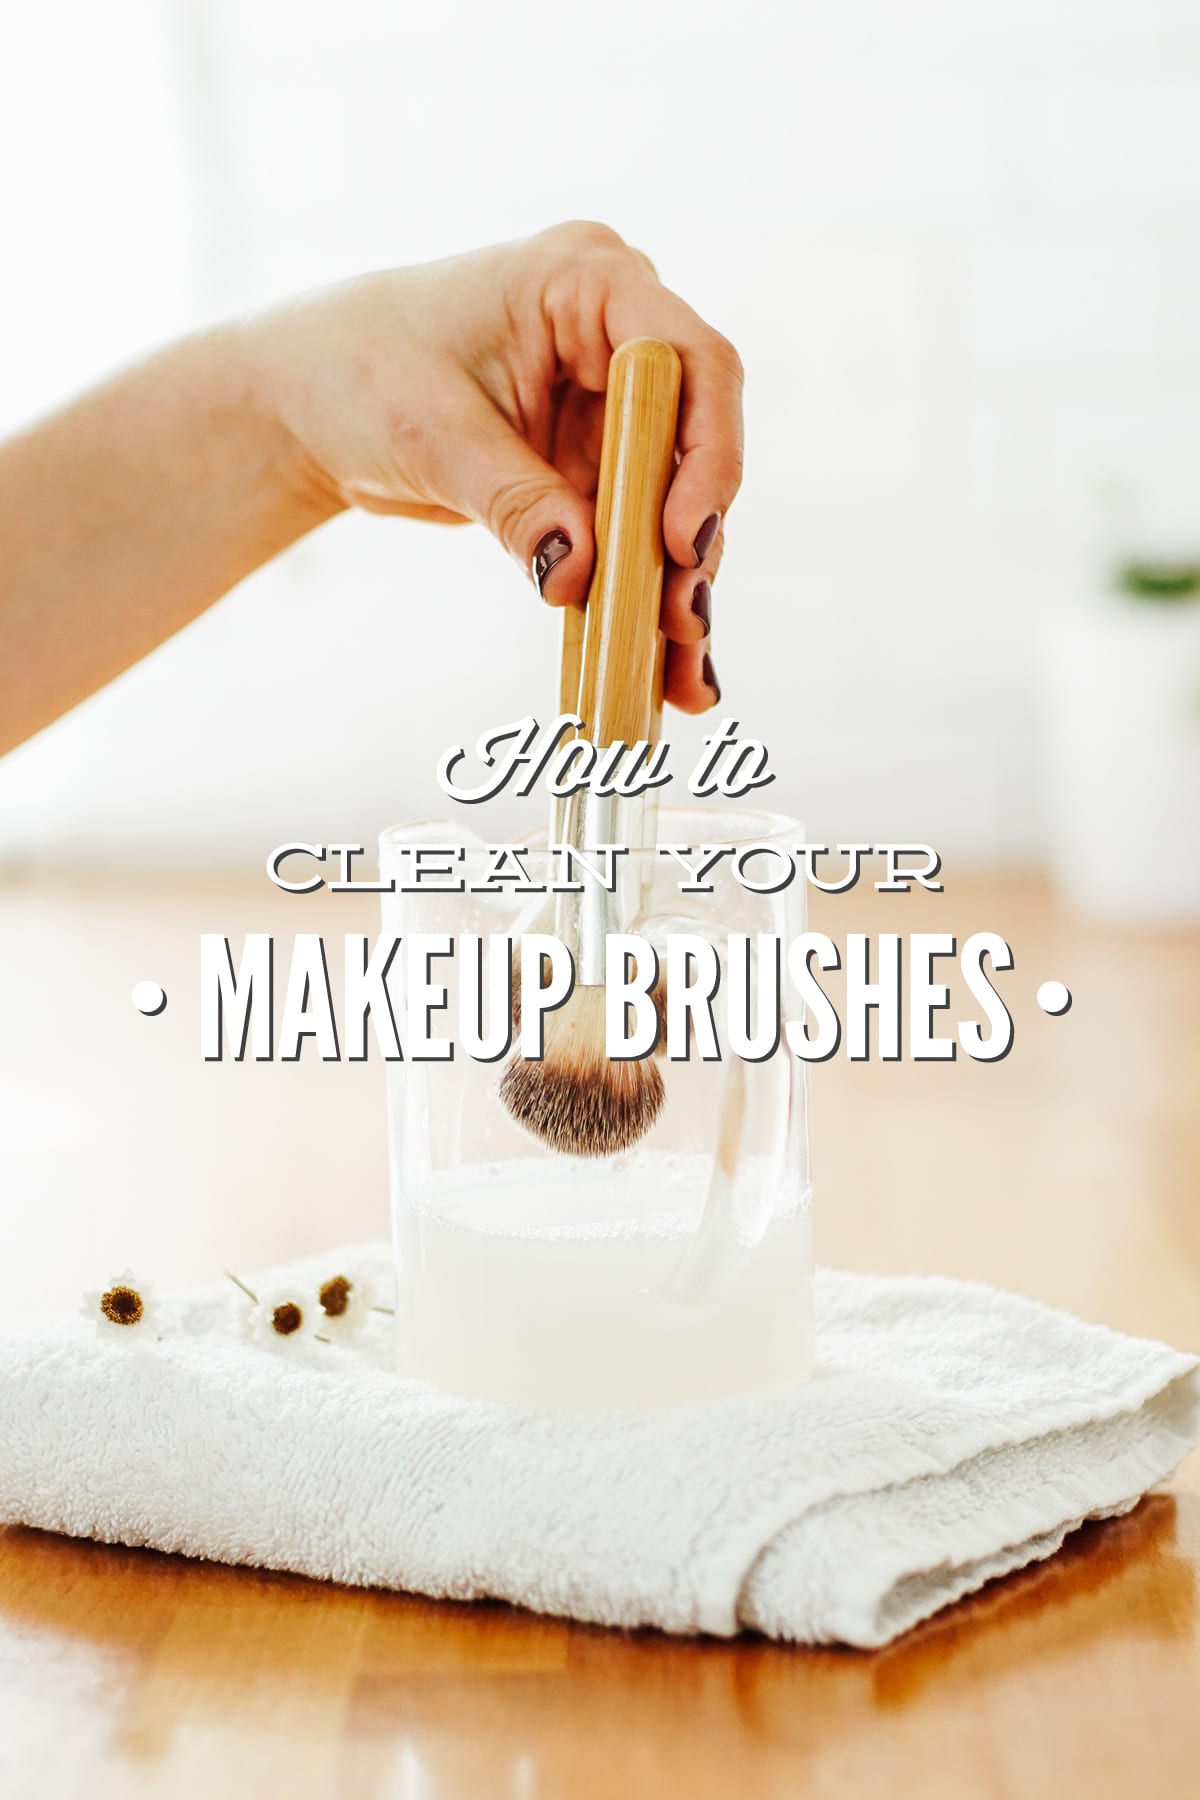 The Best Way to Clean Makeup Brushes + DIY Recipe